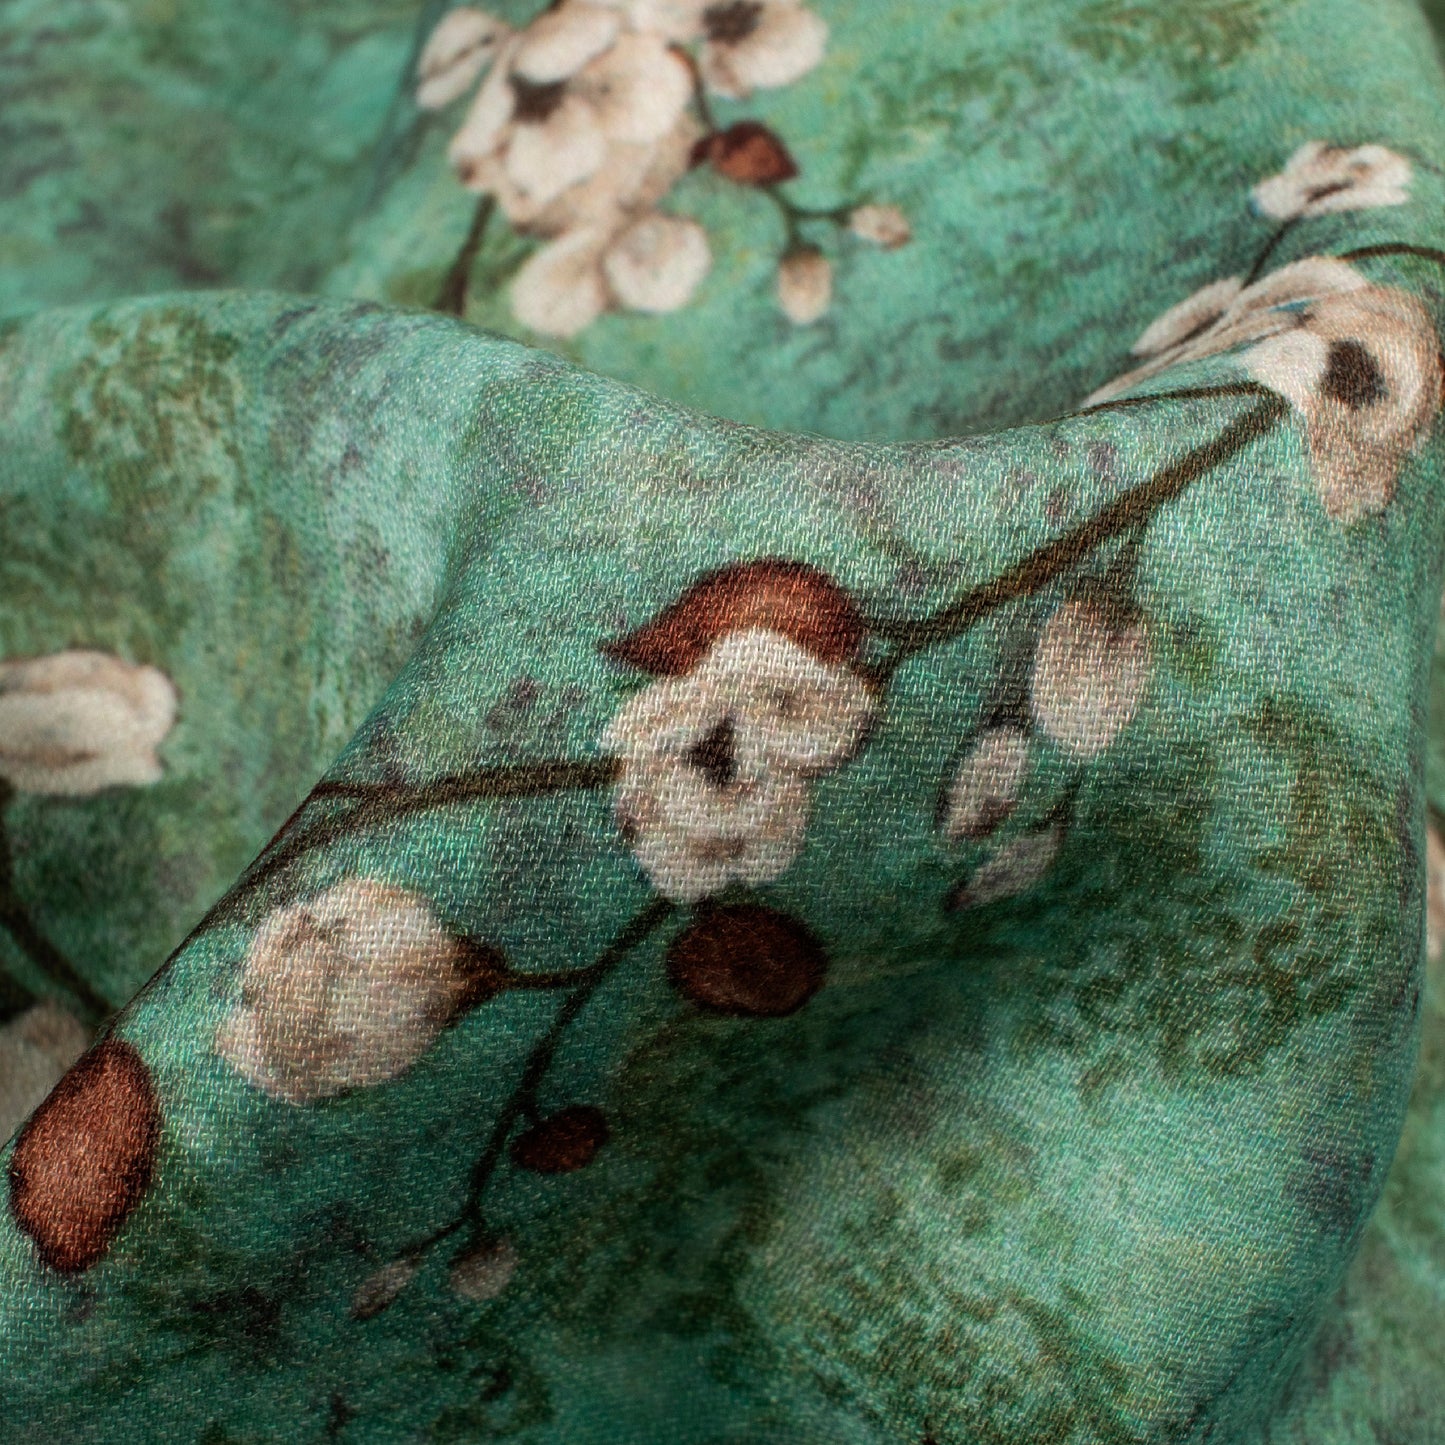 Sniffy Floral Digital Print Moss Crepe Fabric